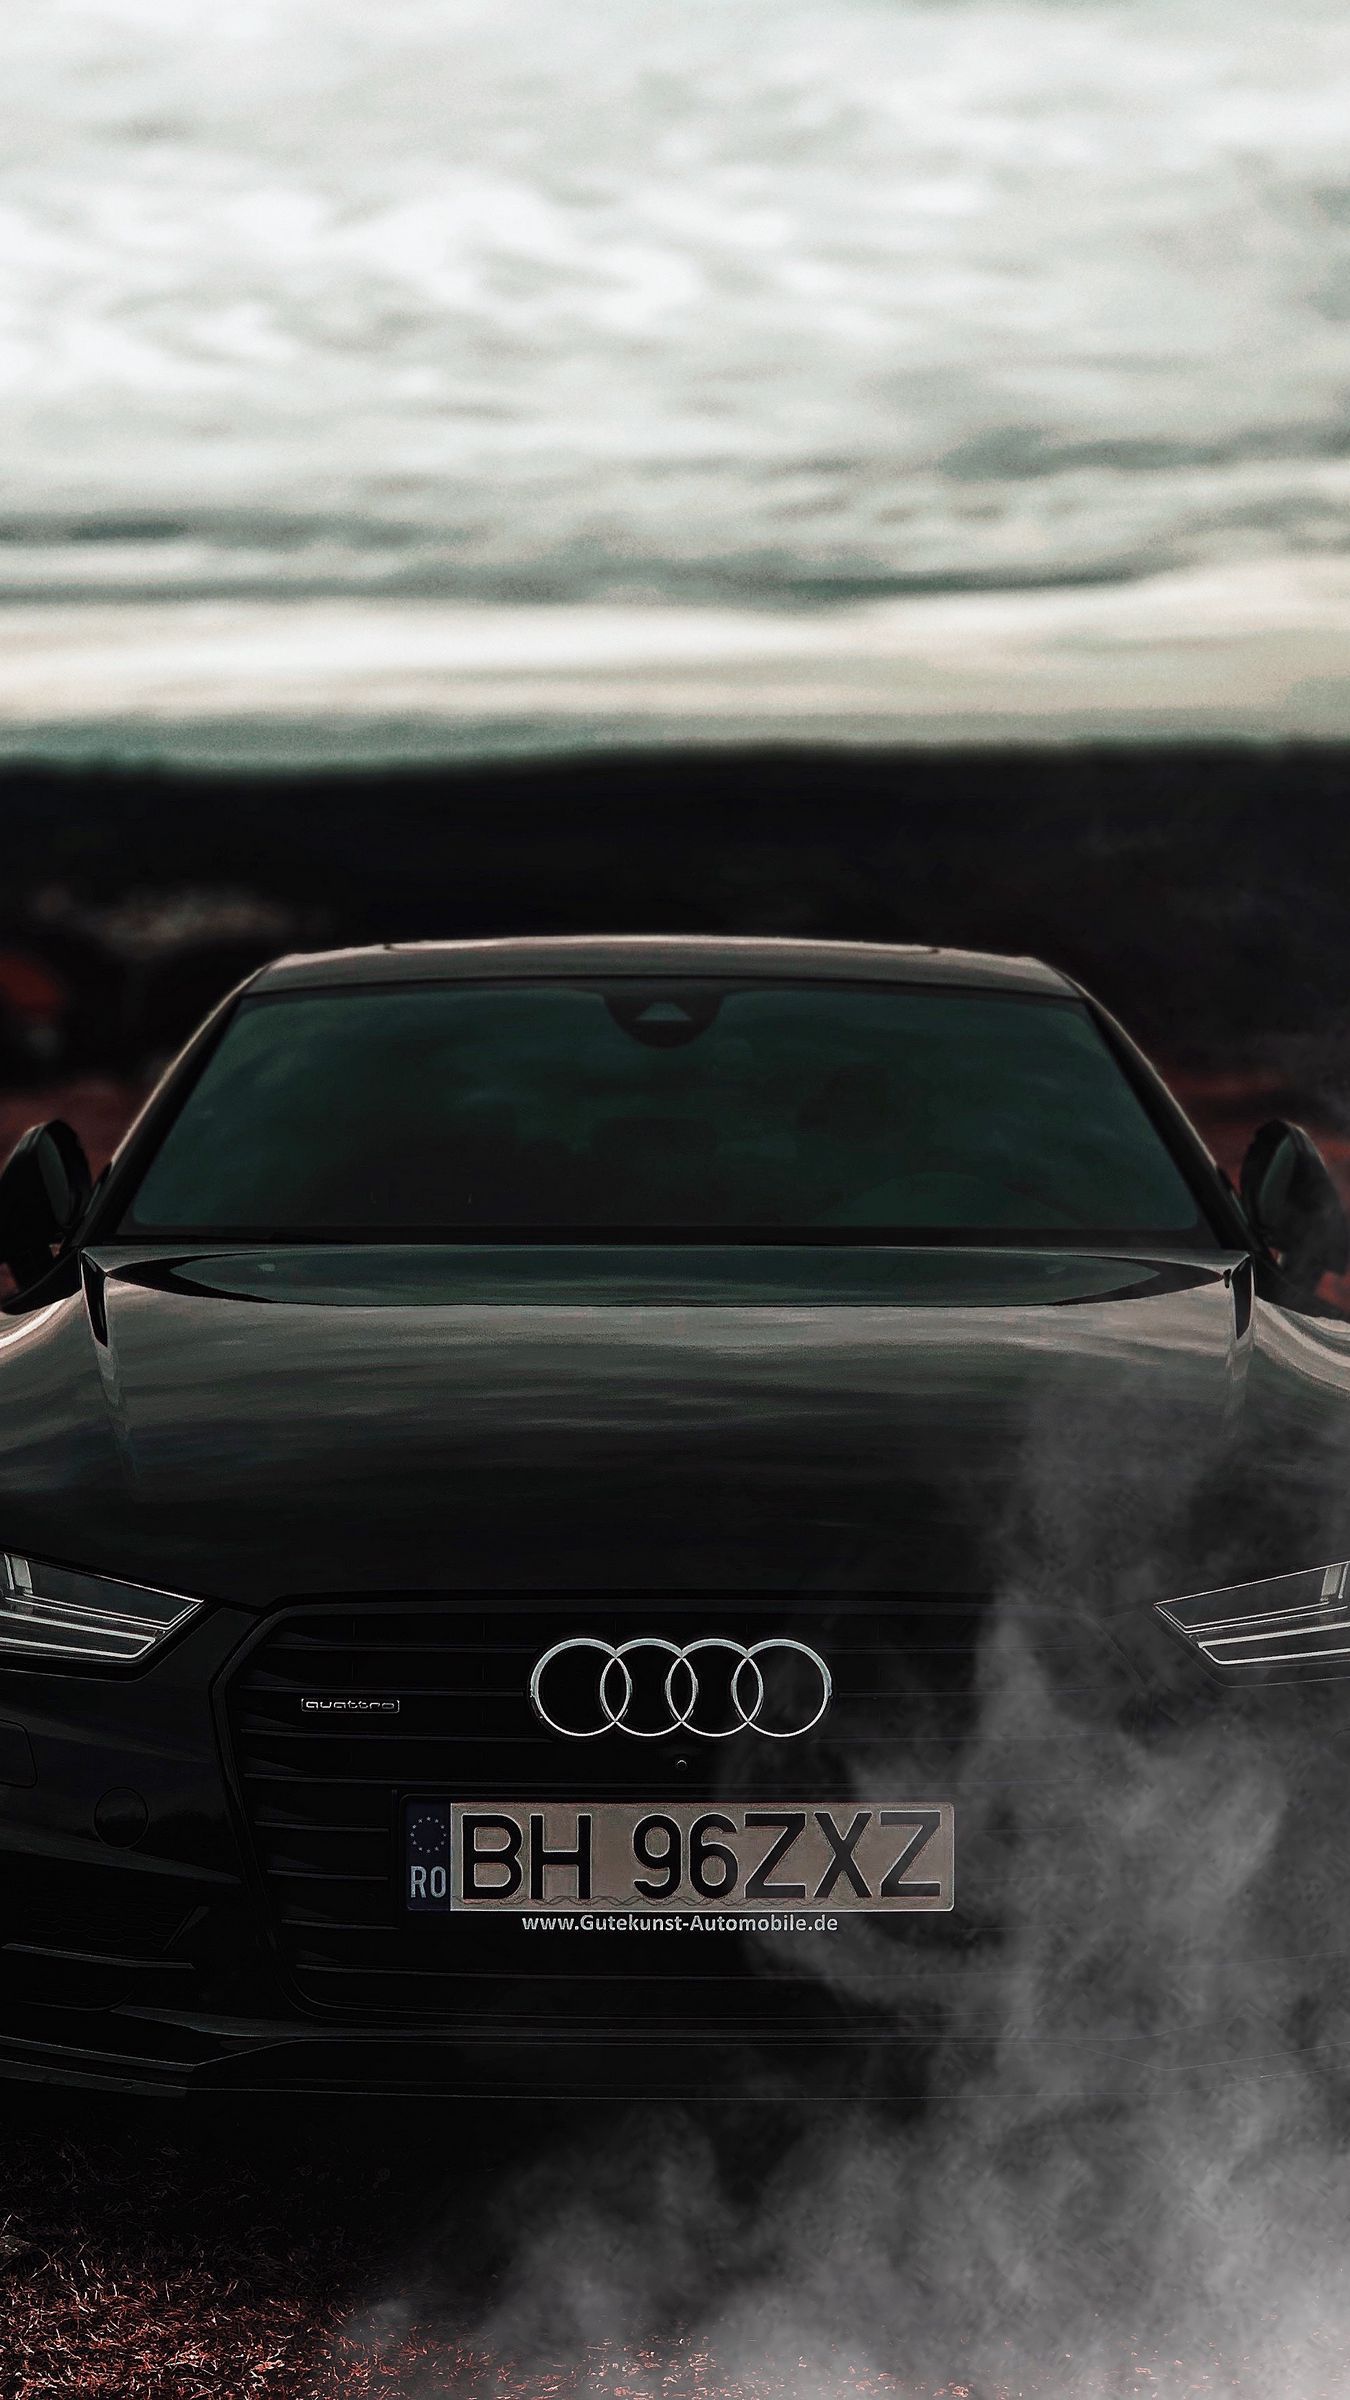 Download wallpaper 1350x2400 audi a audi, black, front view, headlights iphone 8+/7+/6s+/for parallax HD background